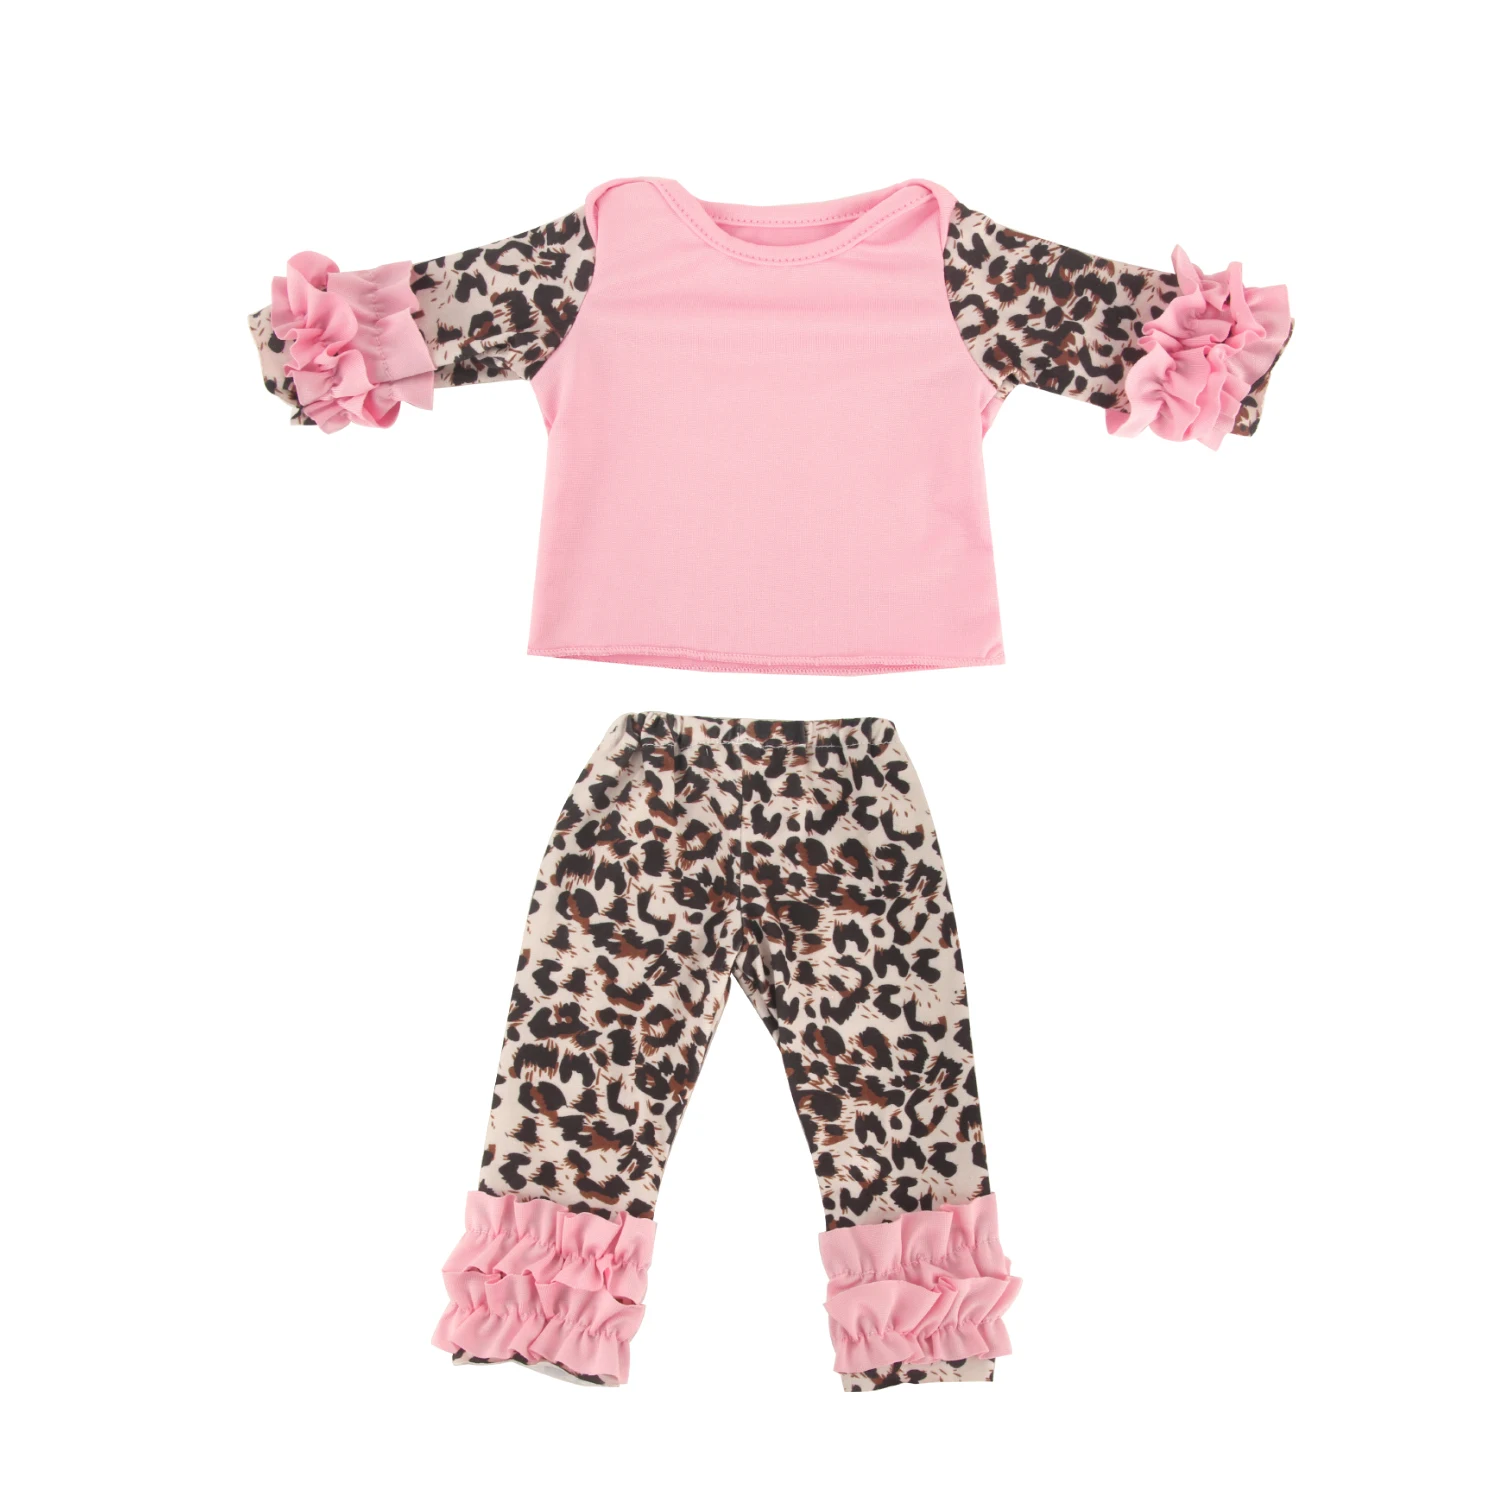 New Arrival 18 inch American Doll Leopard print pink pajamas Girl  Doll Clothes